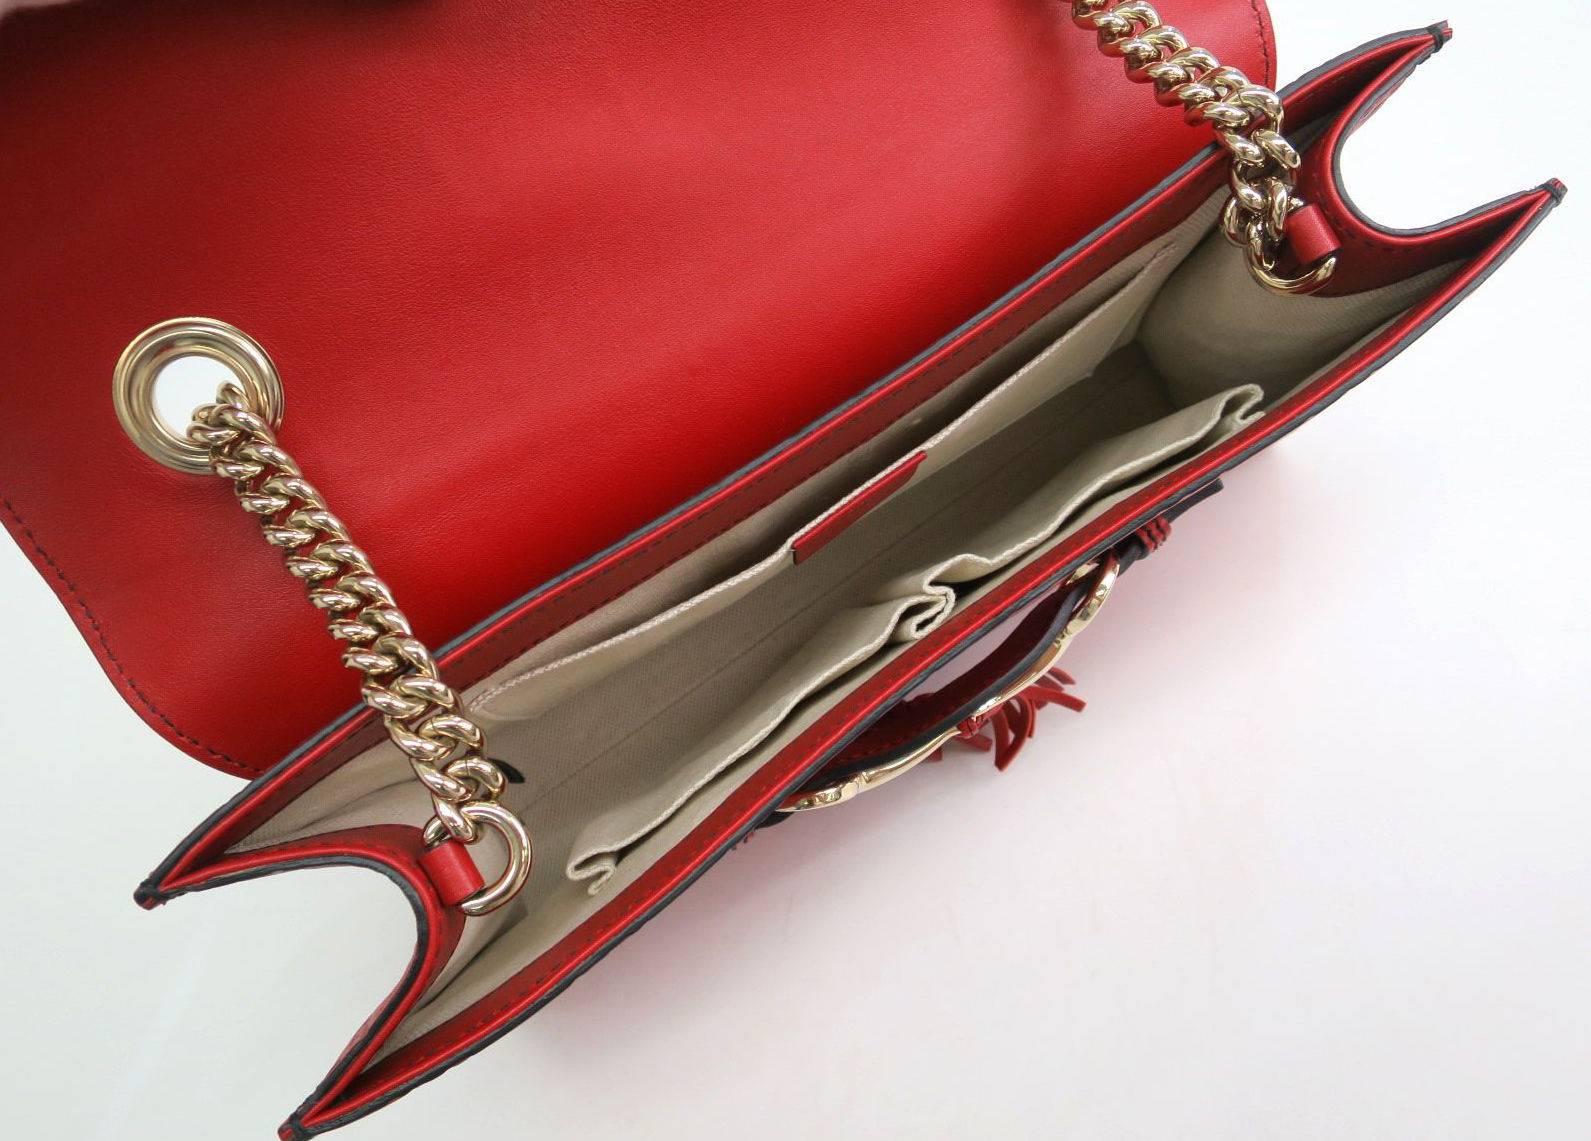 Women's Gucci Monogram GG Flap Red Leather Gold Chain Crossbody Shoulder Bag